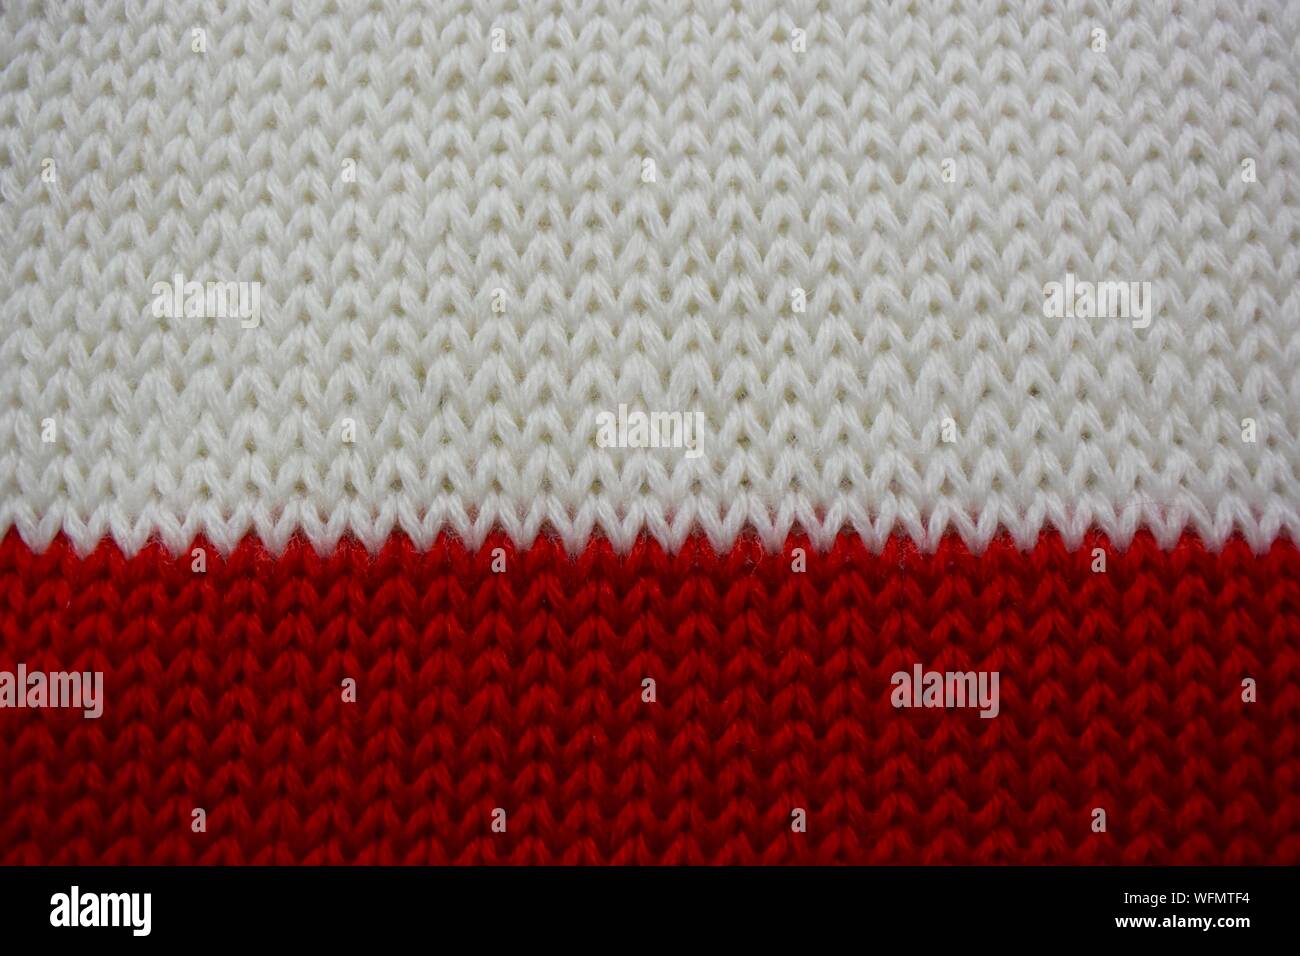 Full Frame Shot Of Red And White Sweater Stock Photo